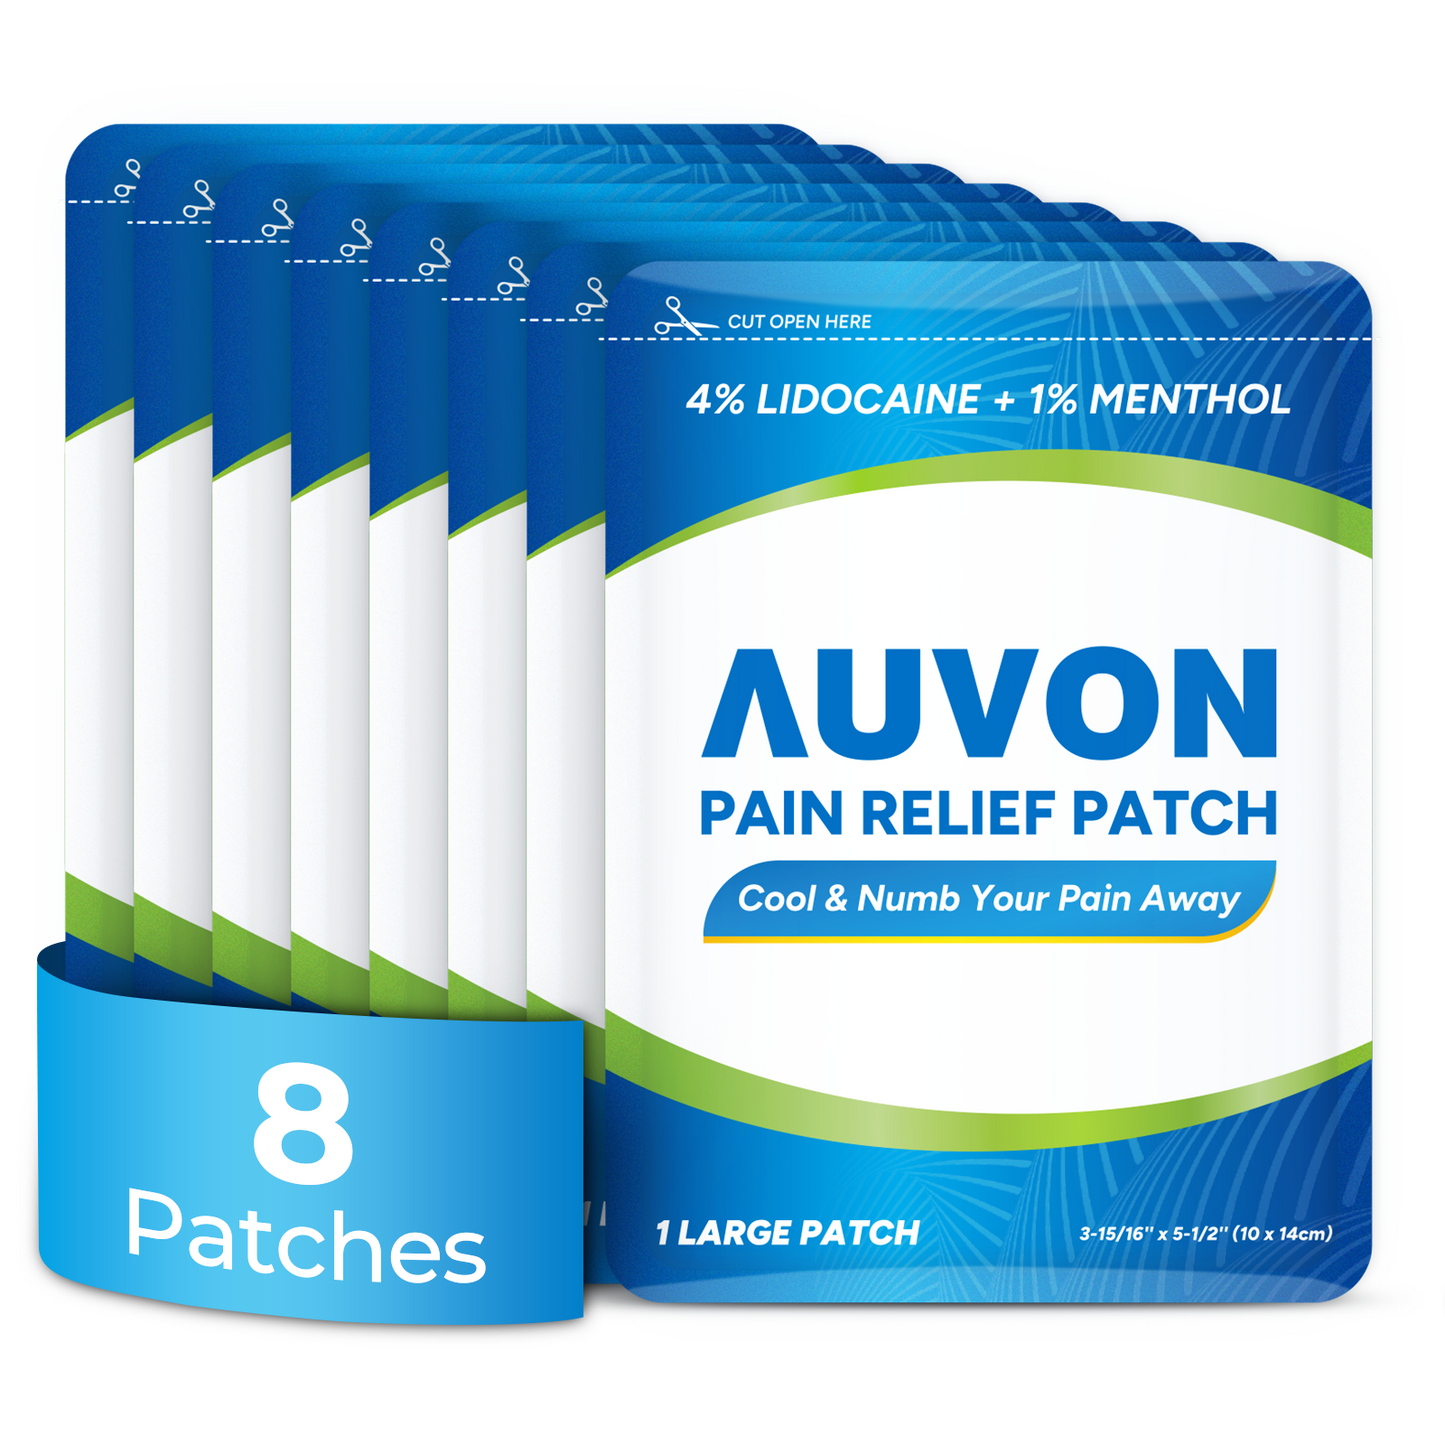 AUVON Maximum Strength Pain Relief Patch (8 Count), 4% Lidocaine Patch with Menthol for Targeted, Soothing Relief